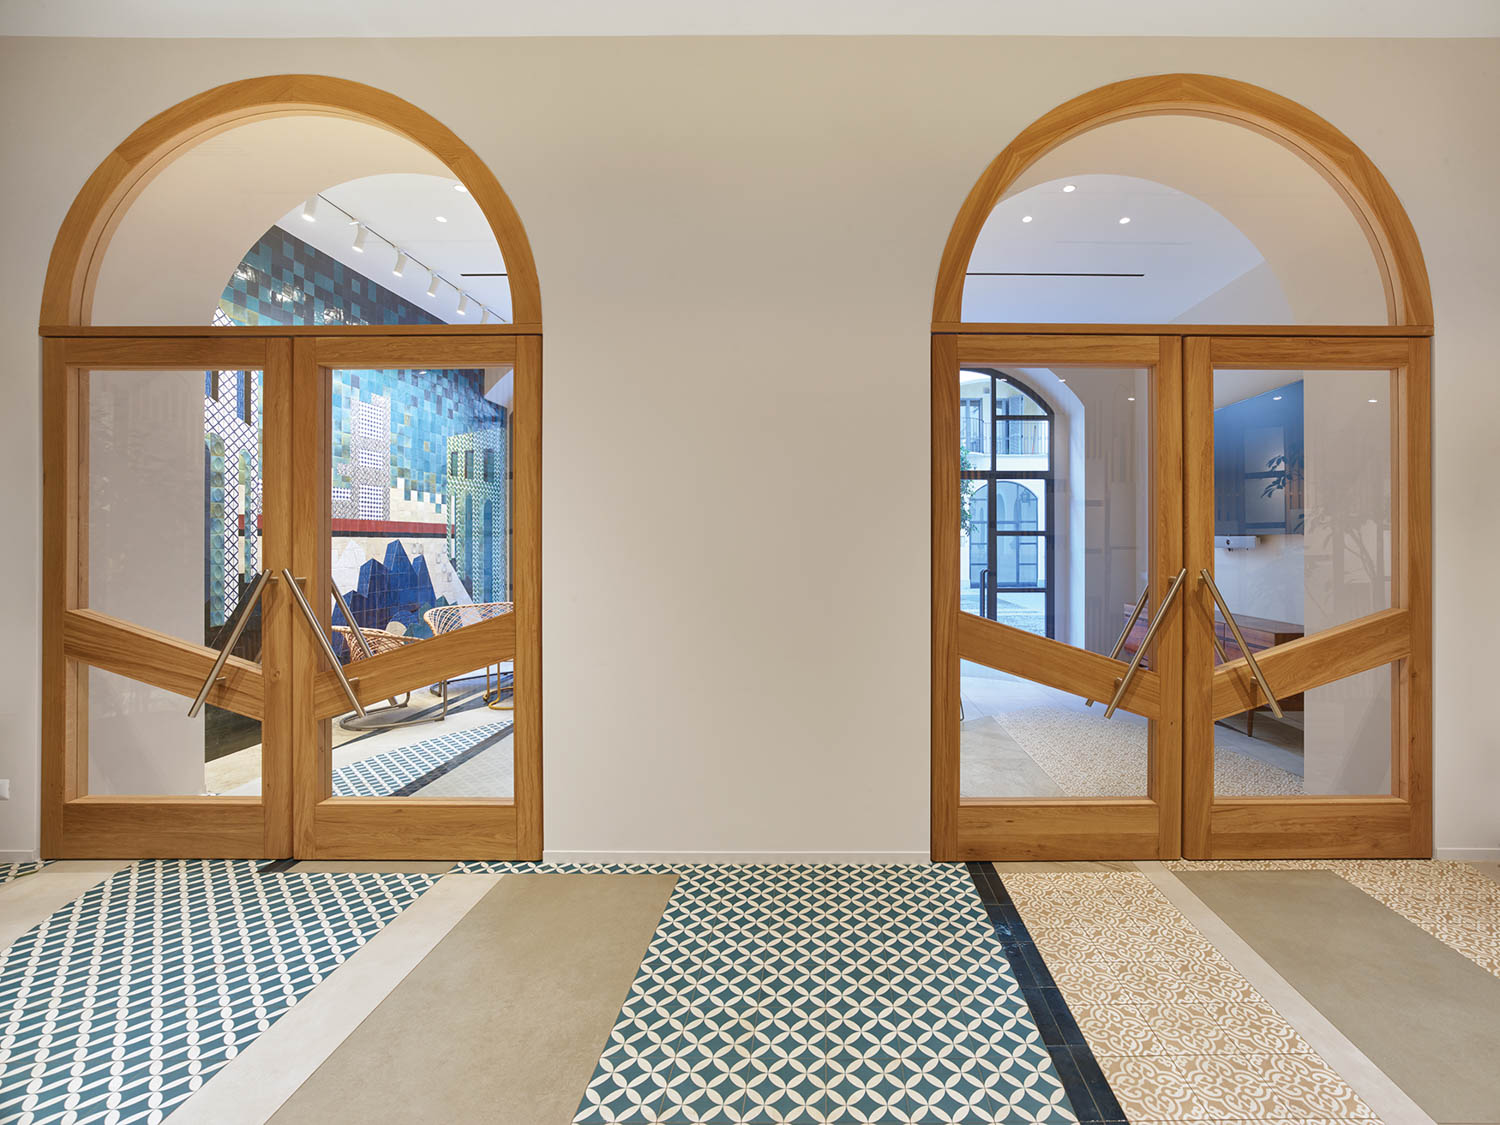 symmetrical arched doorways in a ceramics supplier store